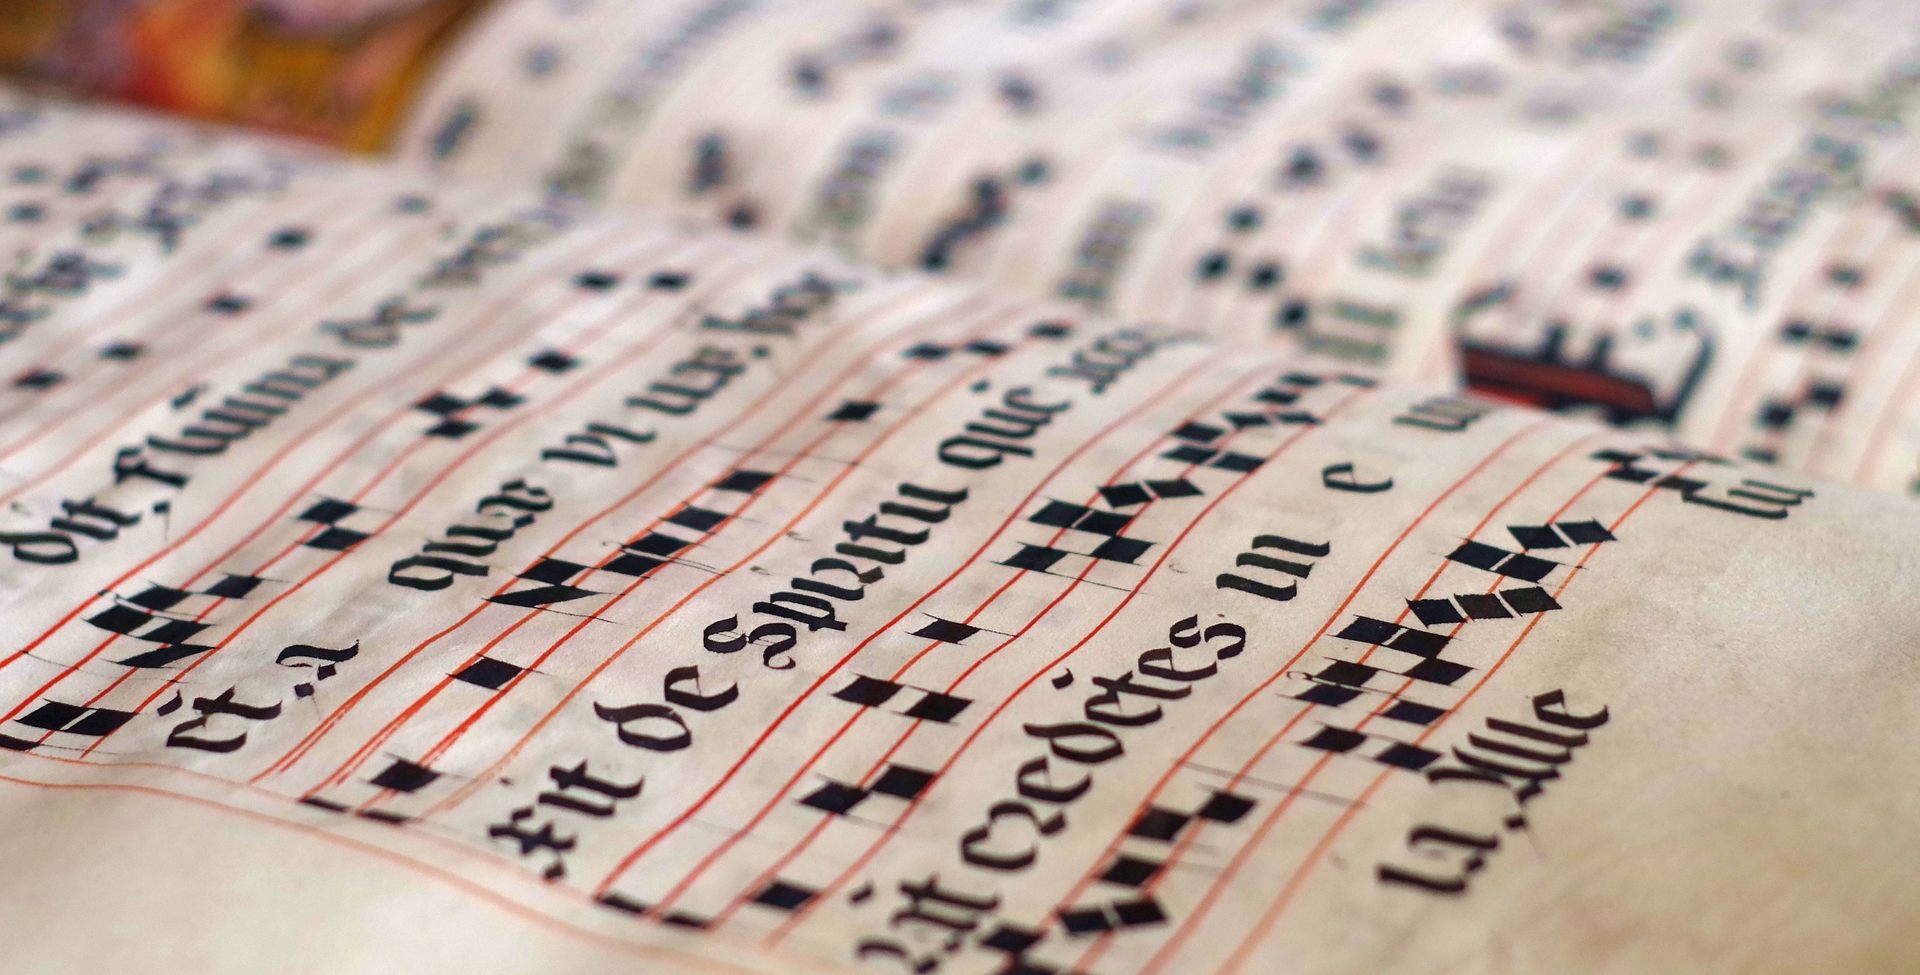 page og Gregorian chant viewed from side angle